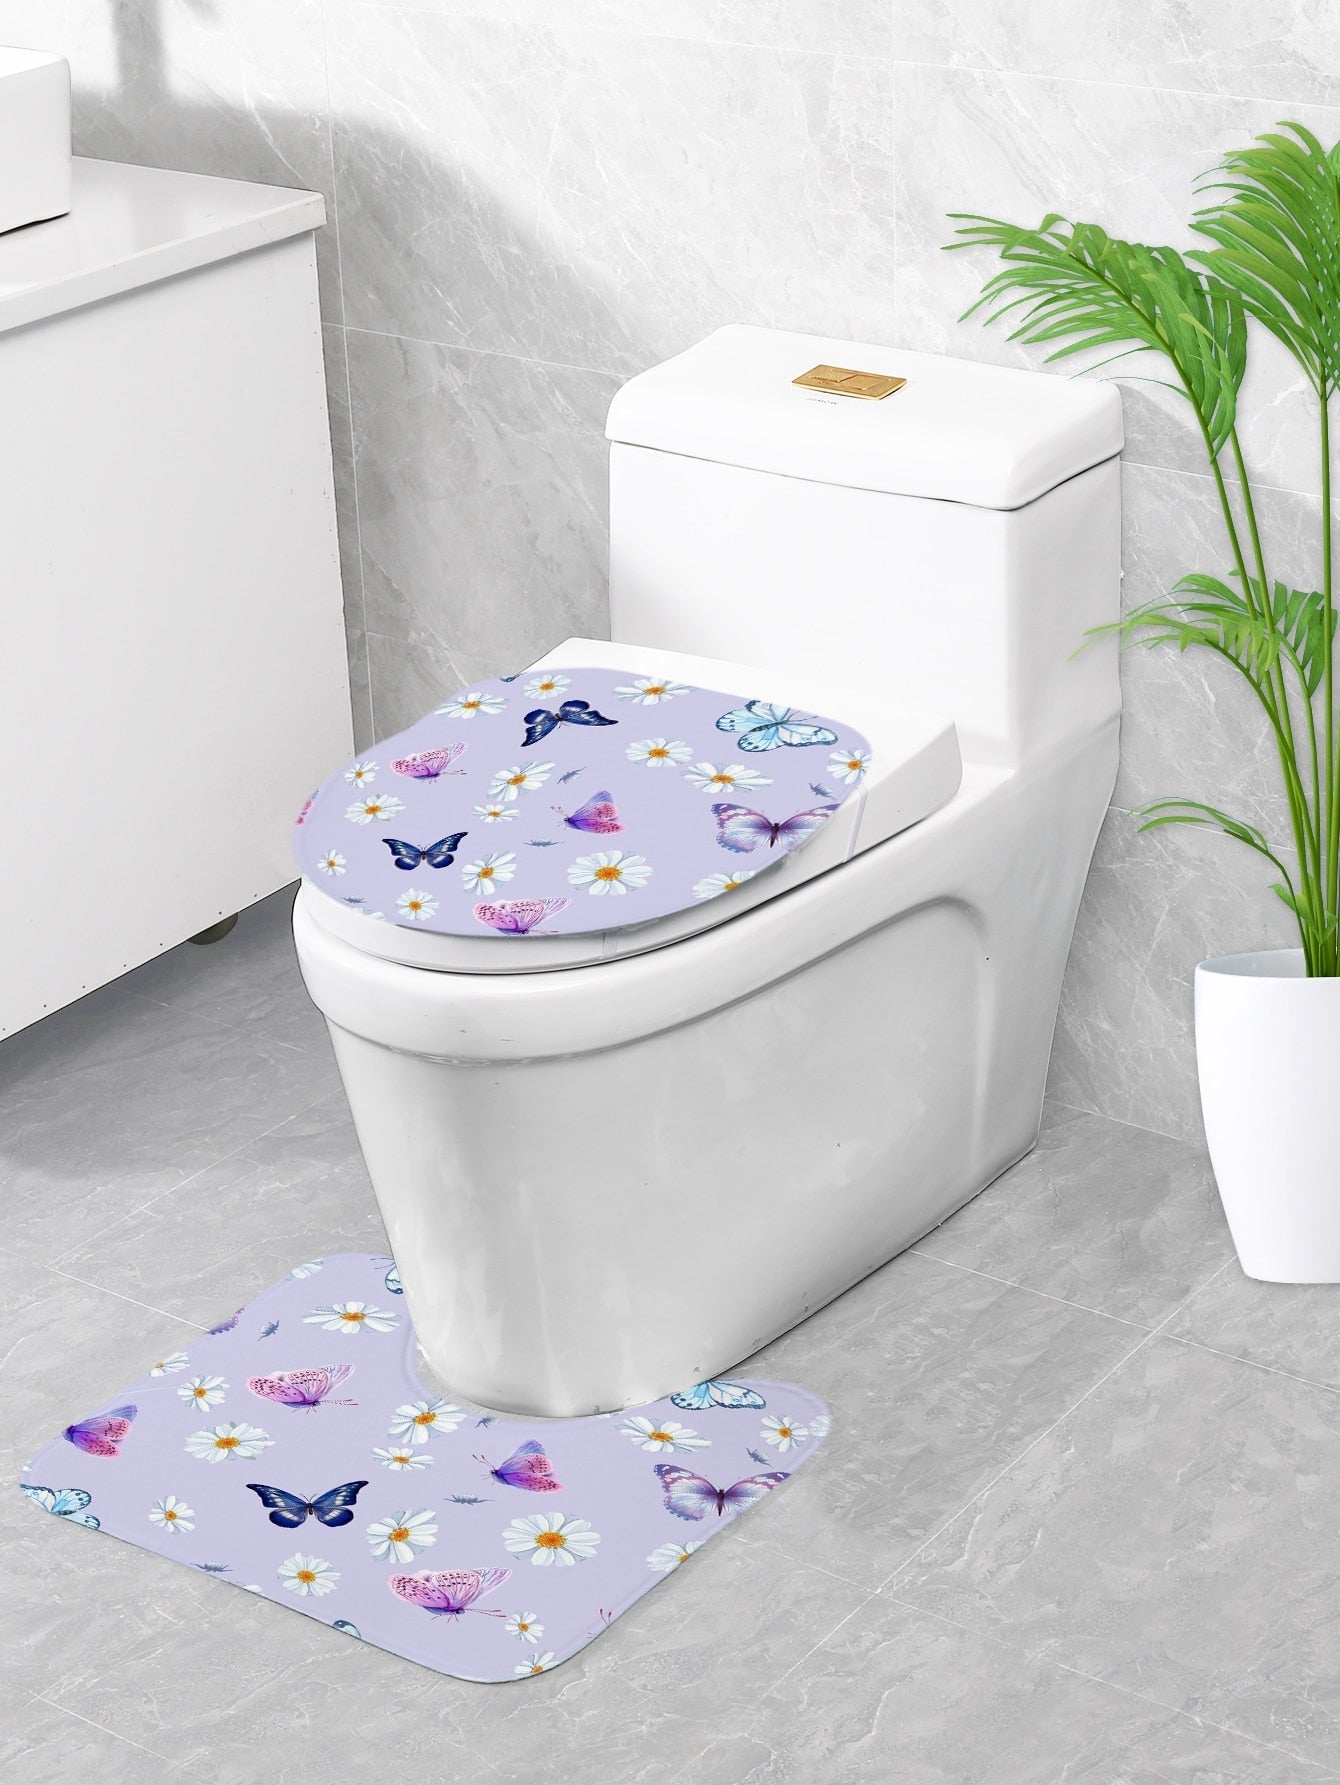 4pc Floral & Butterfly Print Bath Rug And Shower Curtain